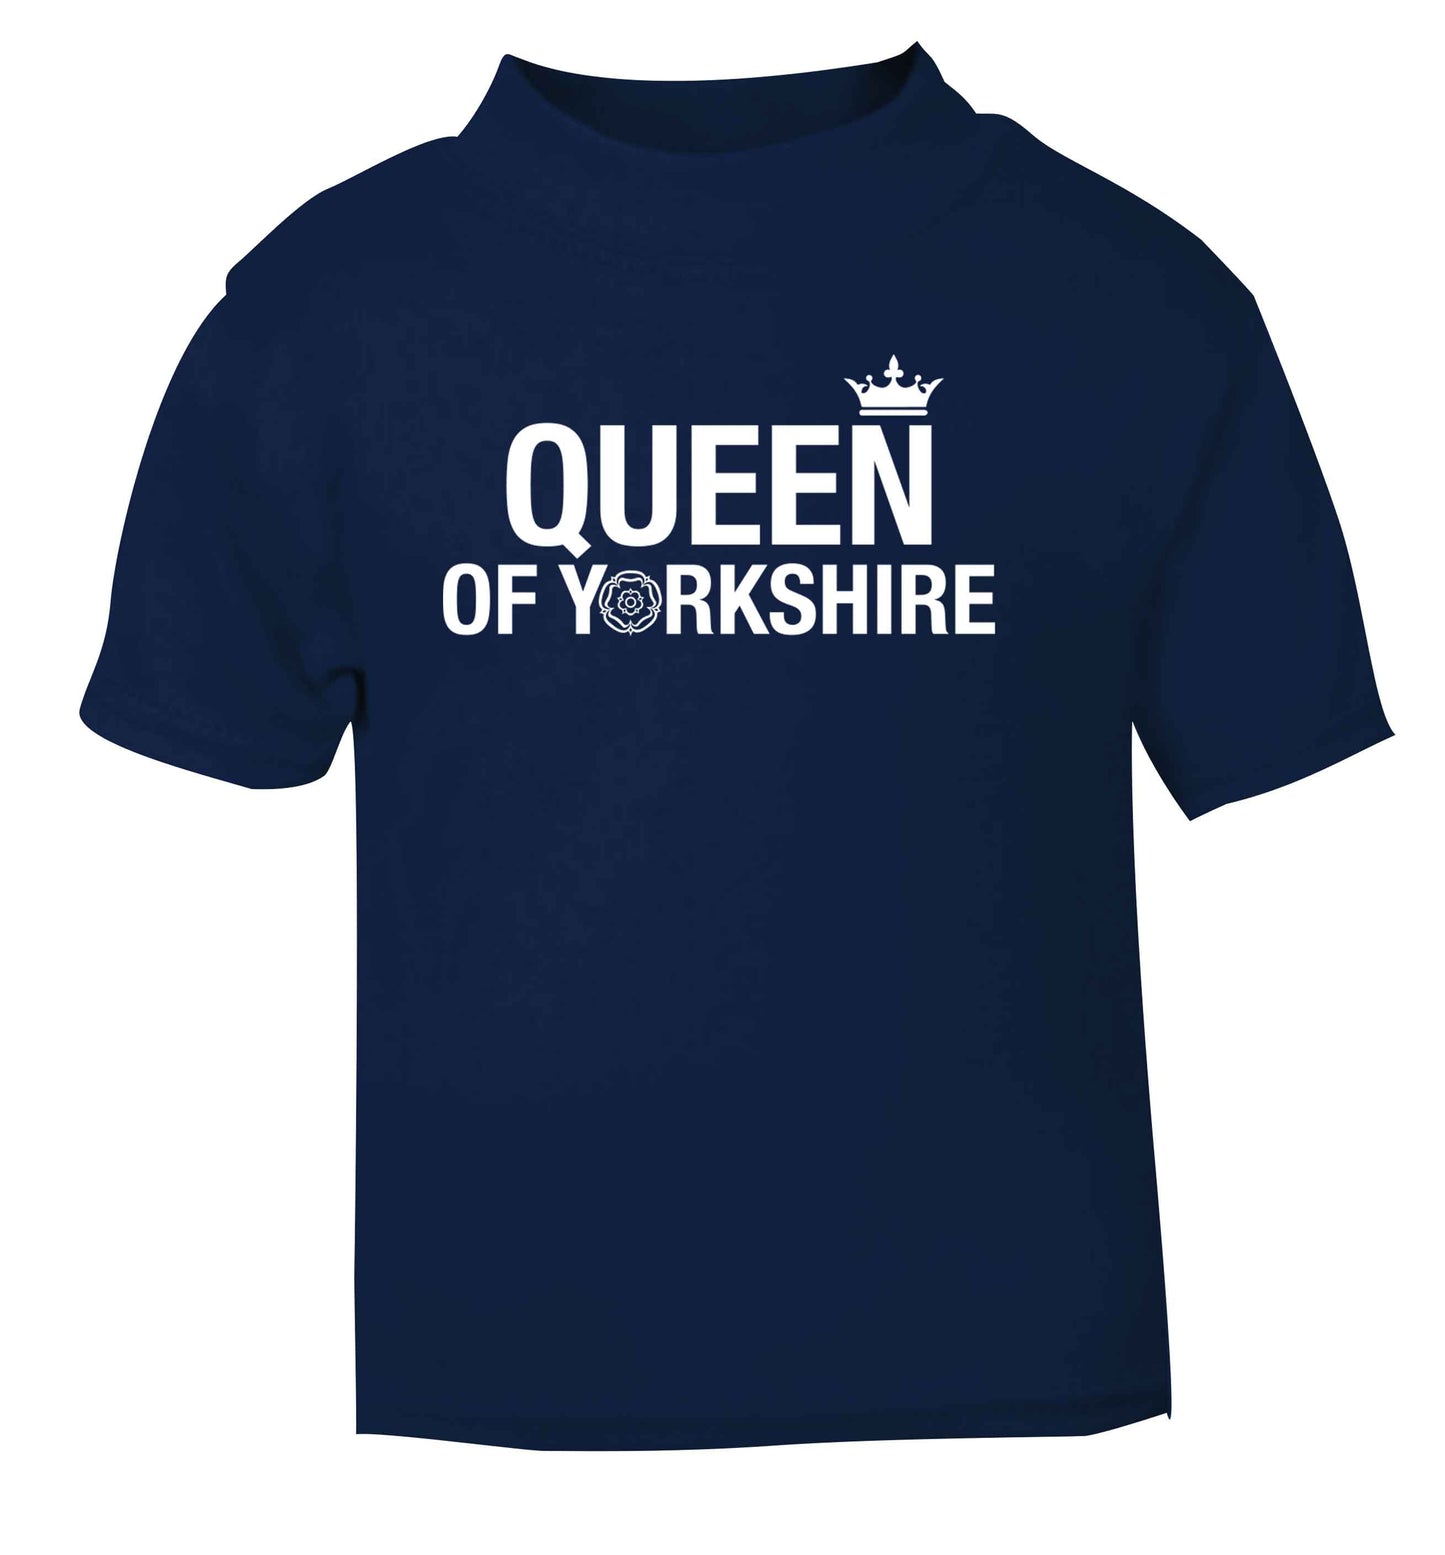 Queen of Yorkshire navy Baby Toddler Tshirt 2 Years